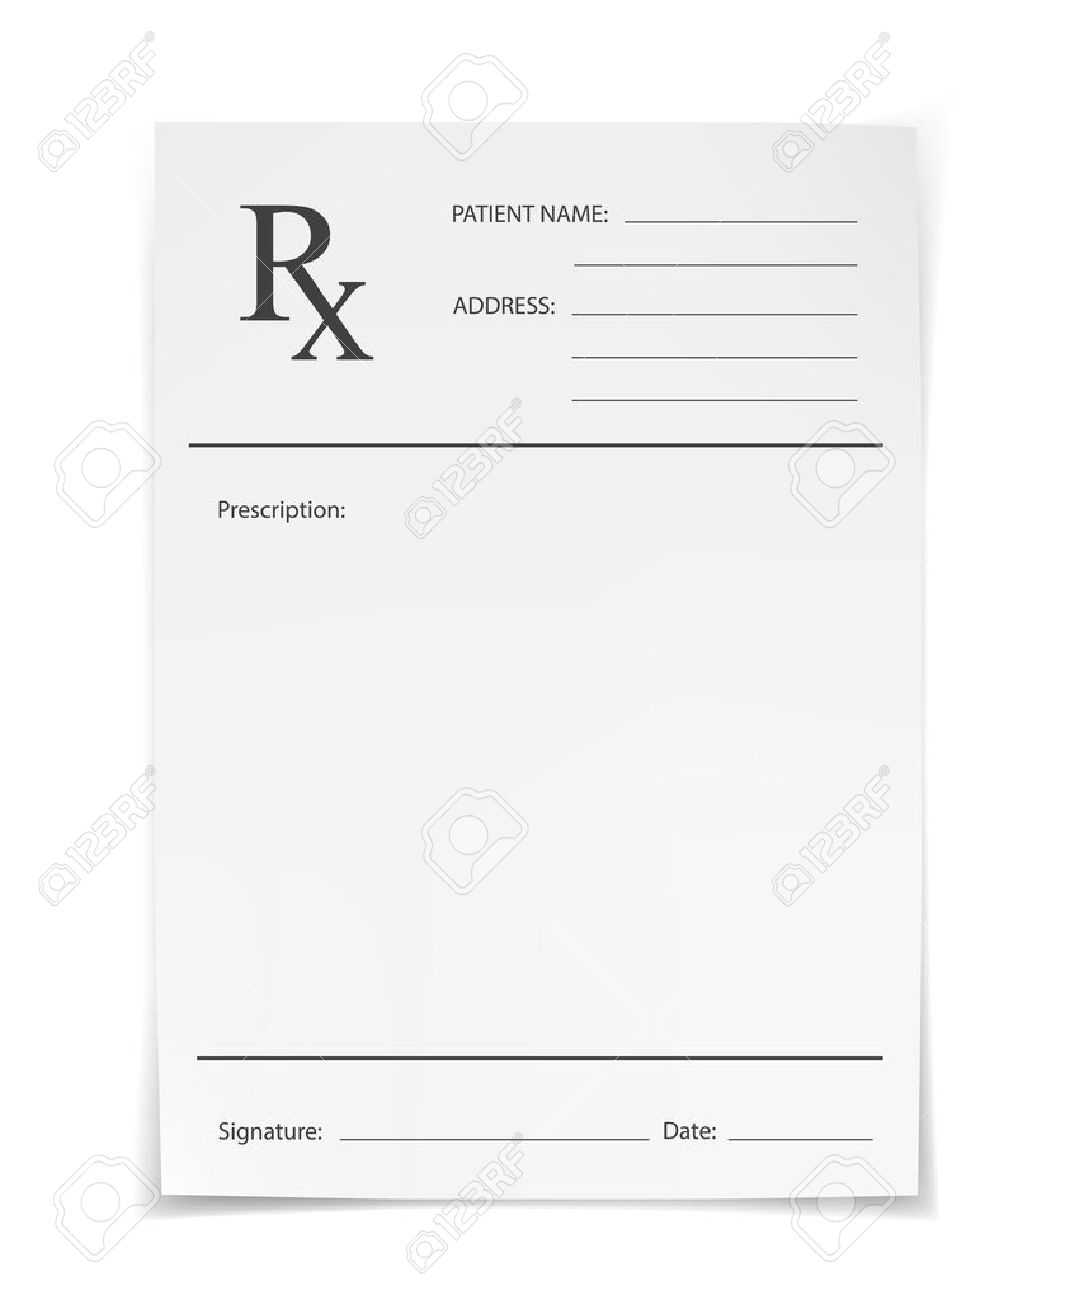 Blank Rx Prescription Form Isolated On White Background For Blank Prescription Form Template